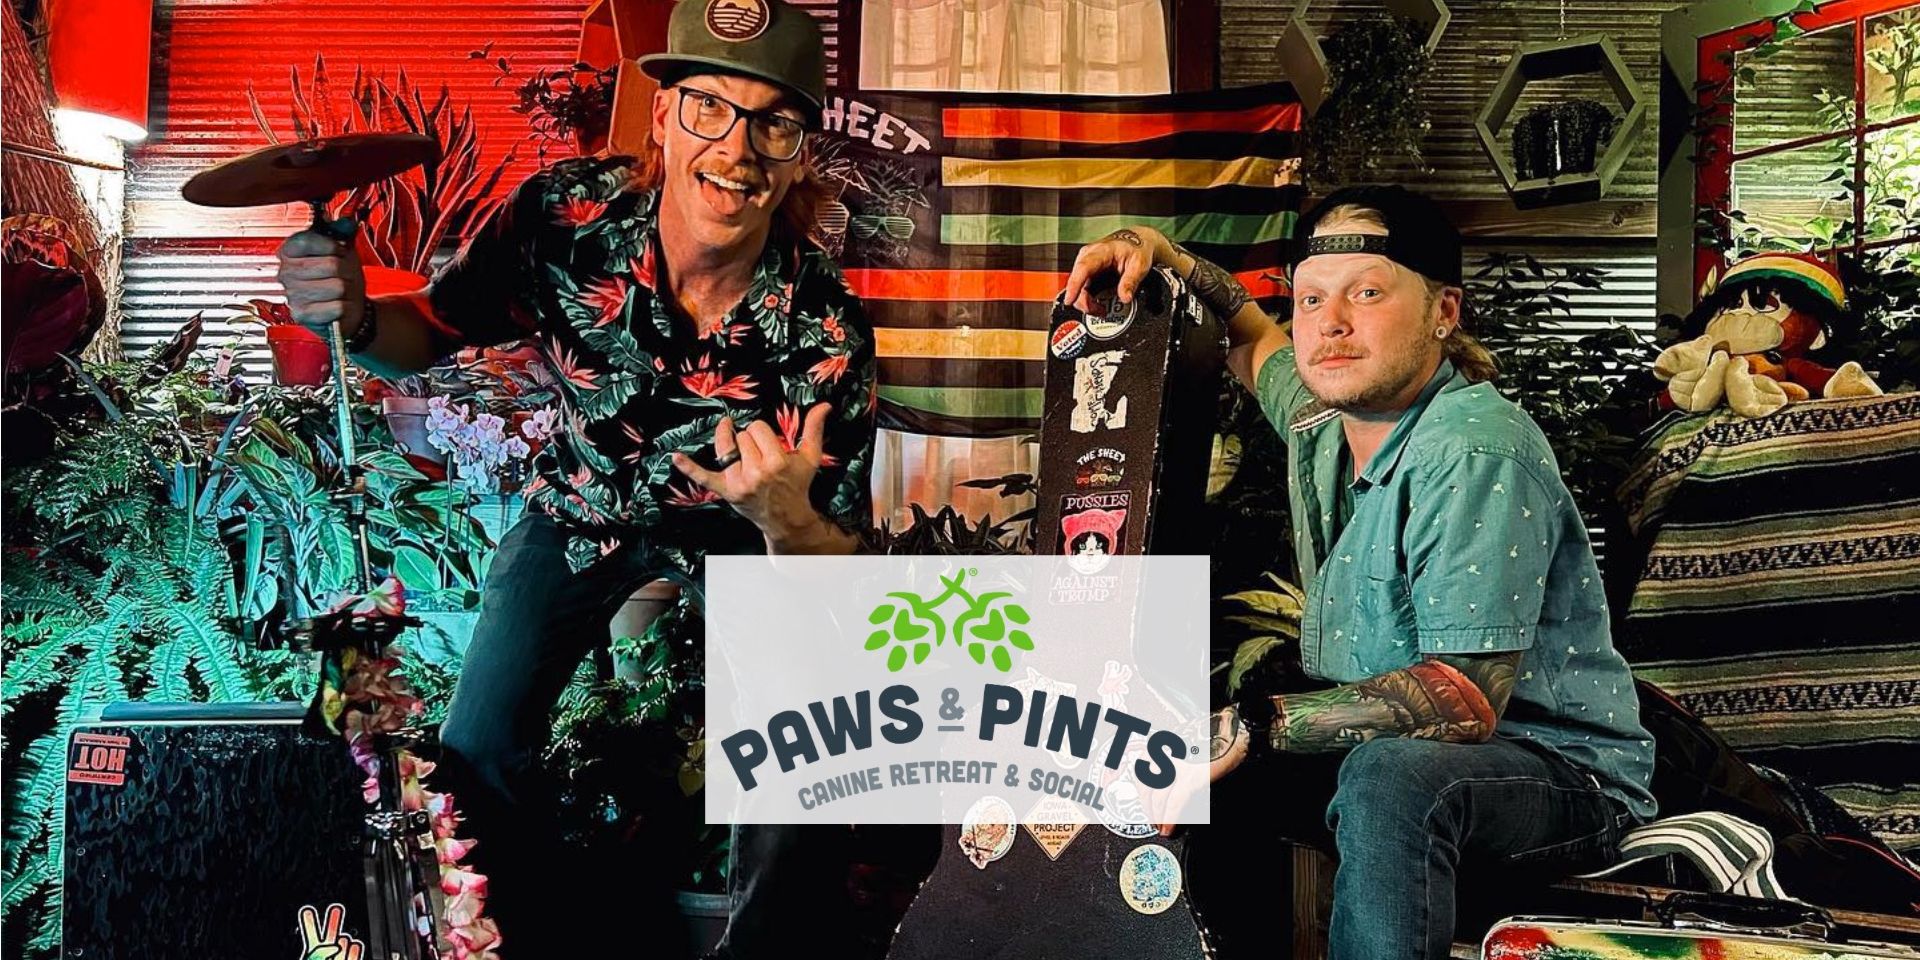 The Sheet at Paws and Pints promotional image